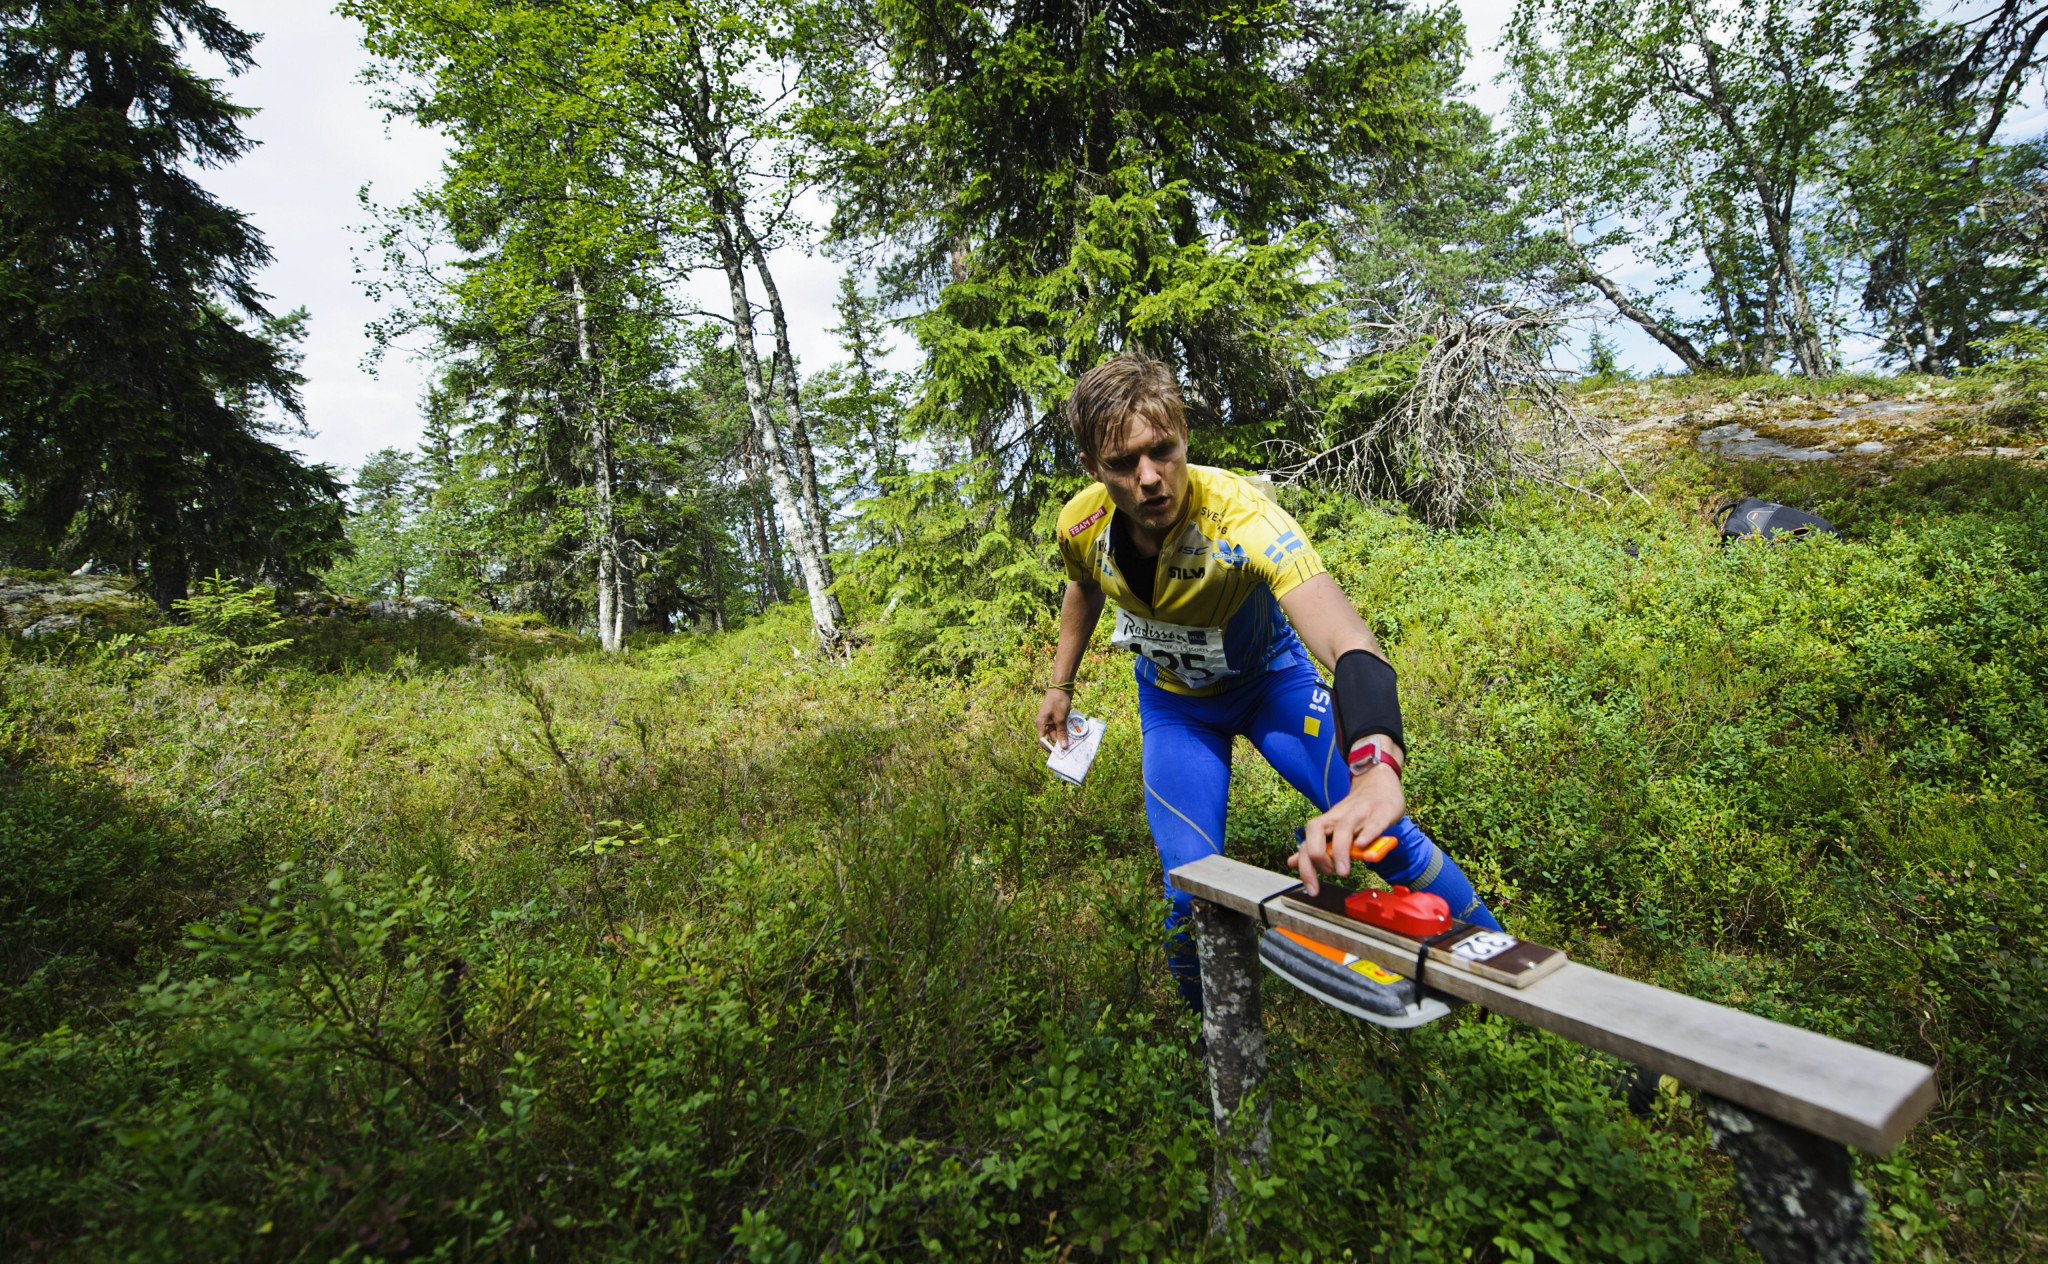 Training activities for 2021 World Orienteering Championships frozen due to COVID-19 travel restrictions